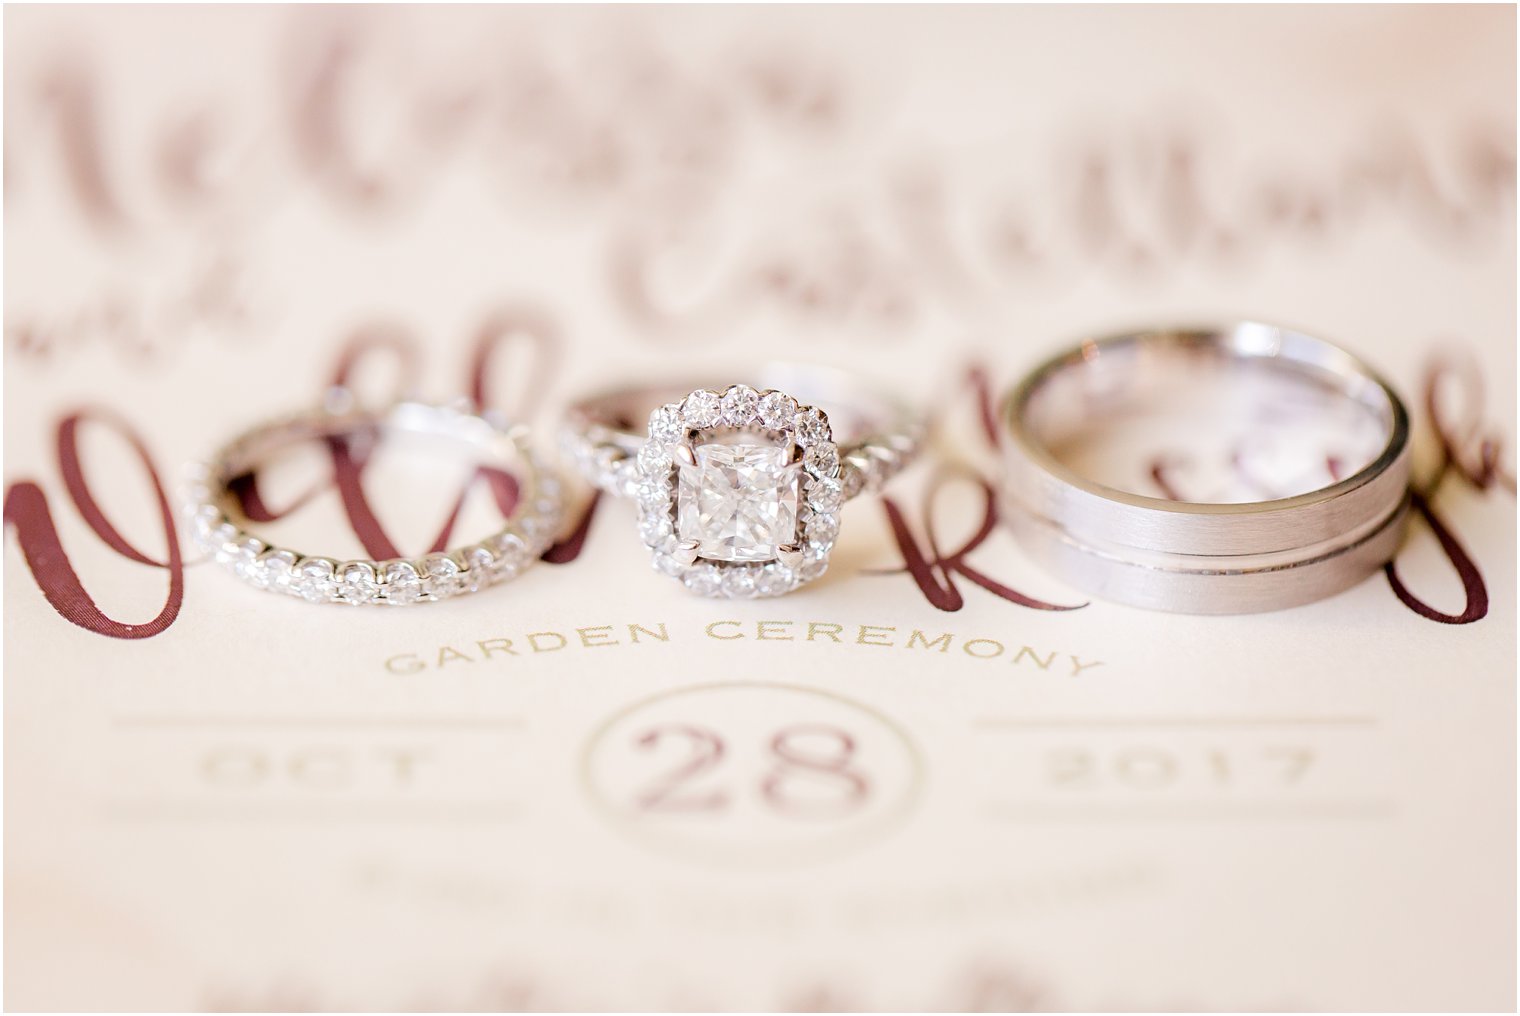 Wedding bands and engagement ring over invitation 